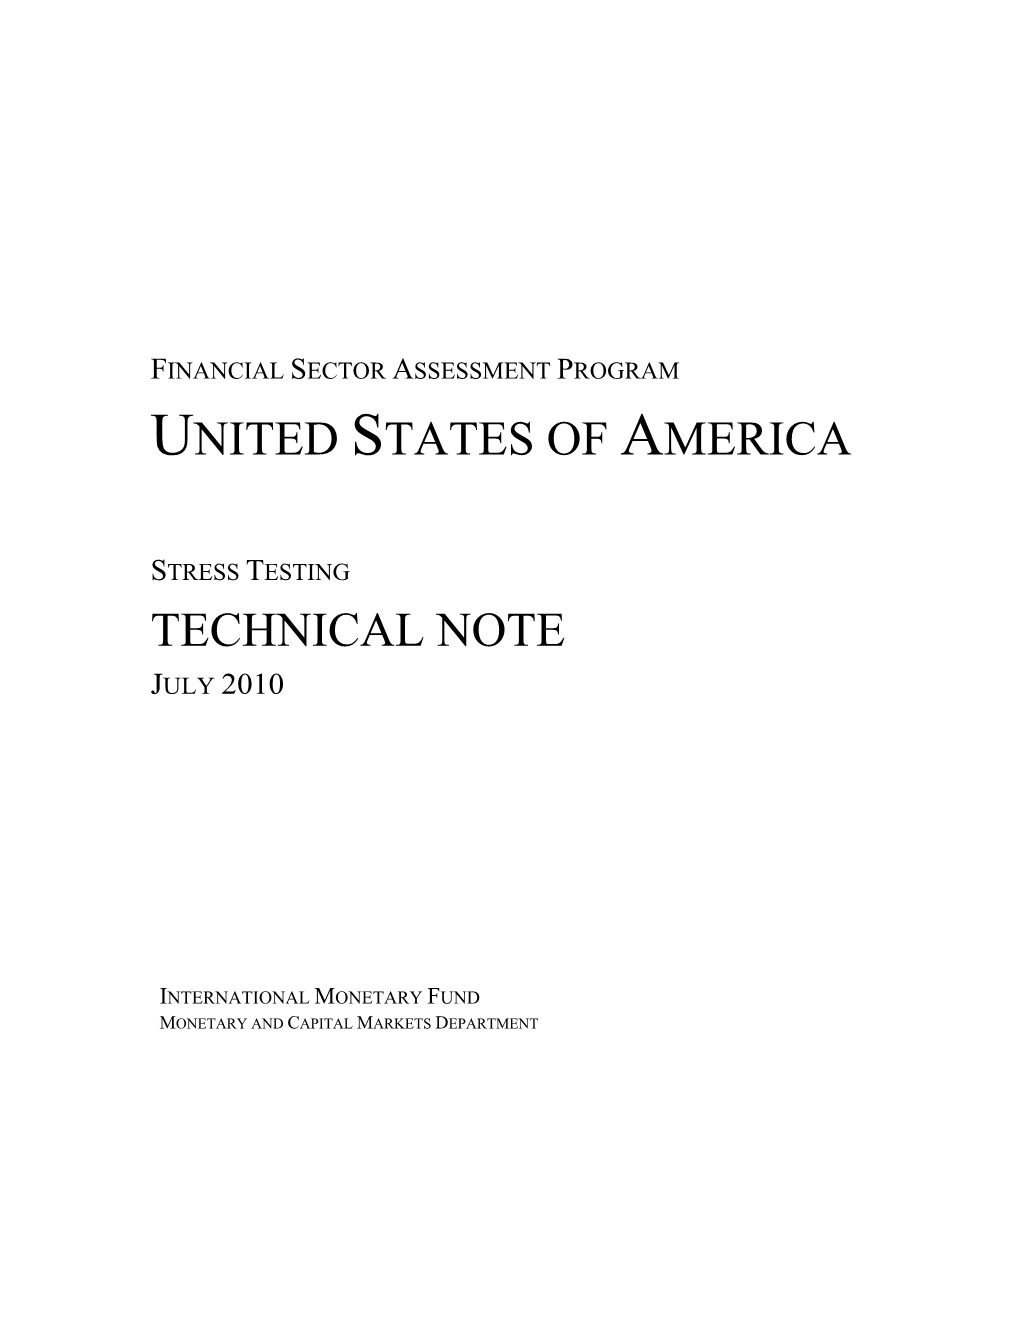 United States of America Technical Note